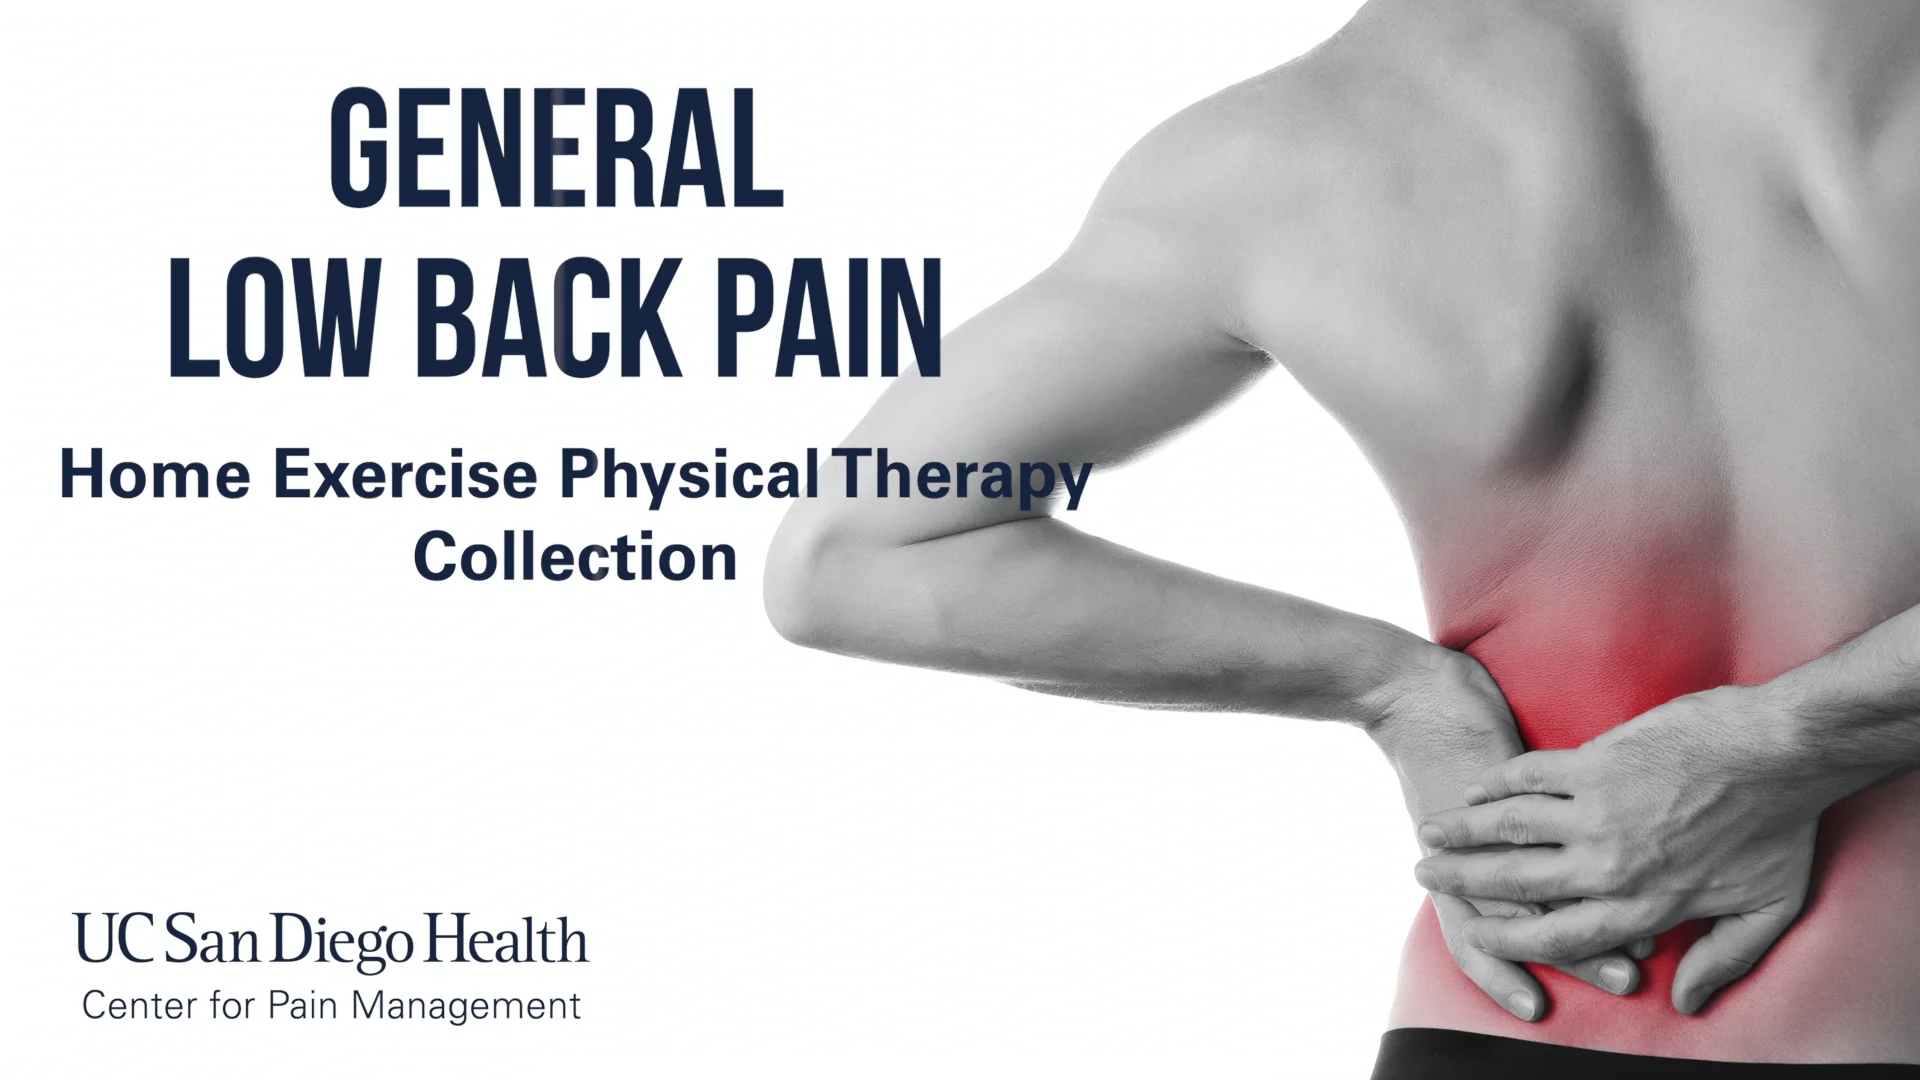 Exercises in Physical Therapy for Lower Back Pain